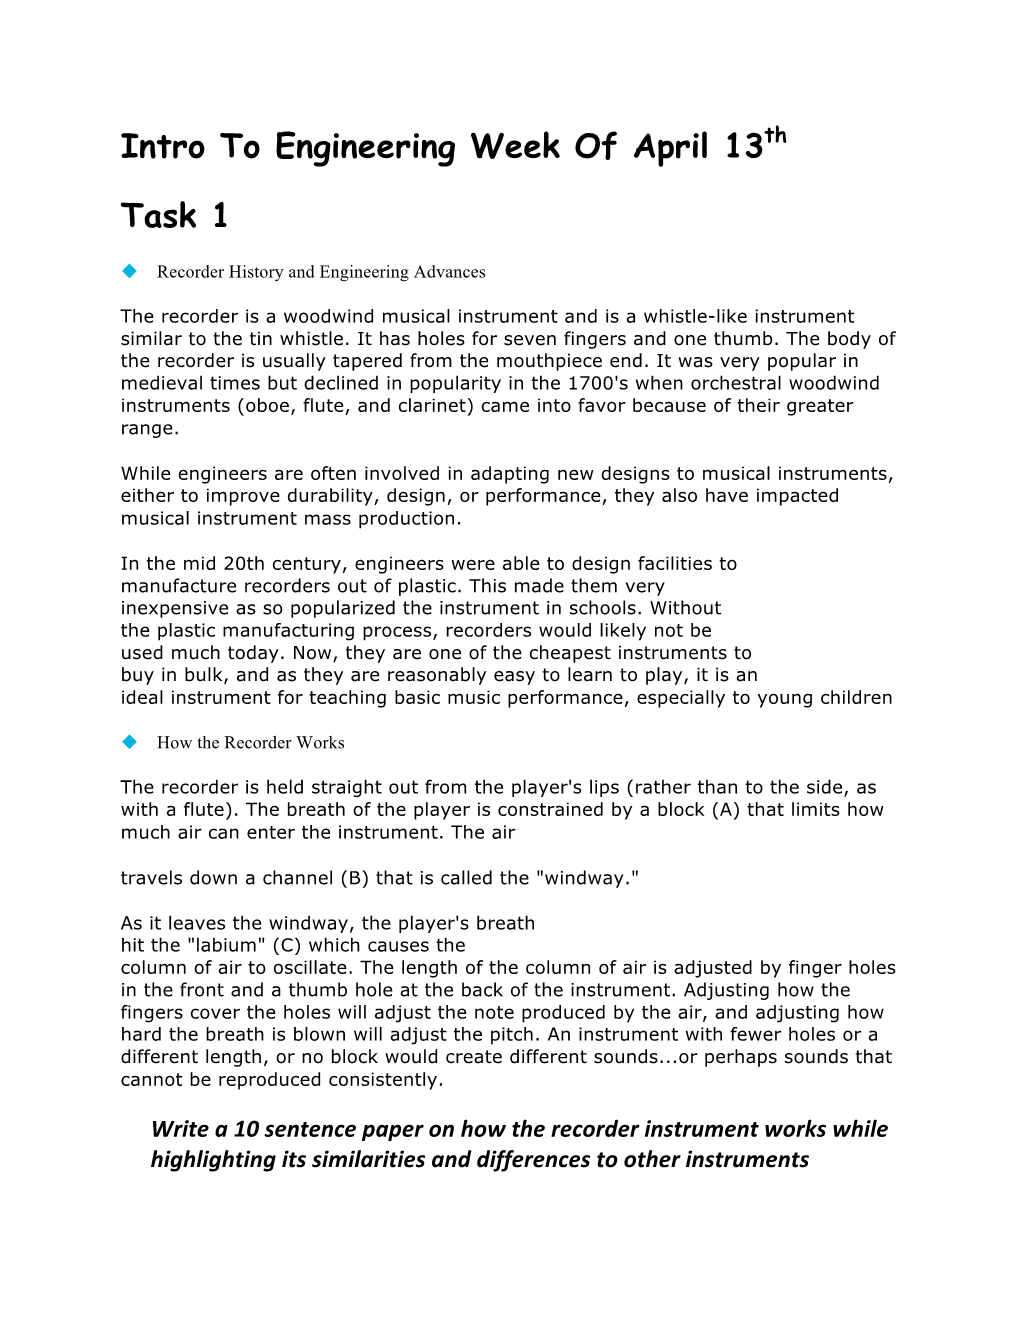 Intro to Engineering Week of April 13Th Task 1